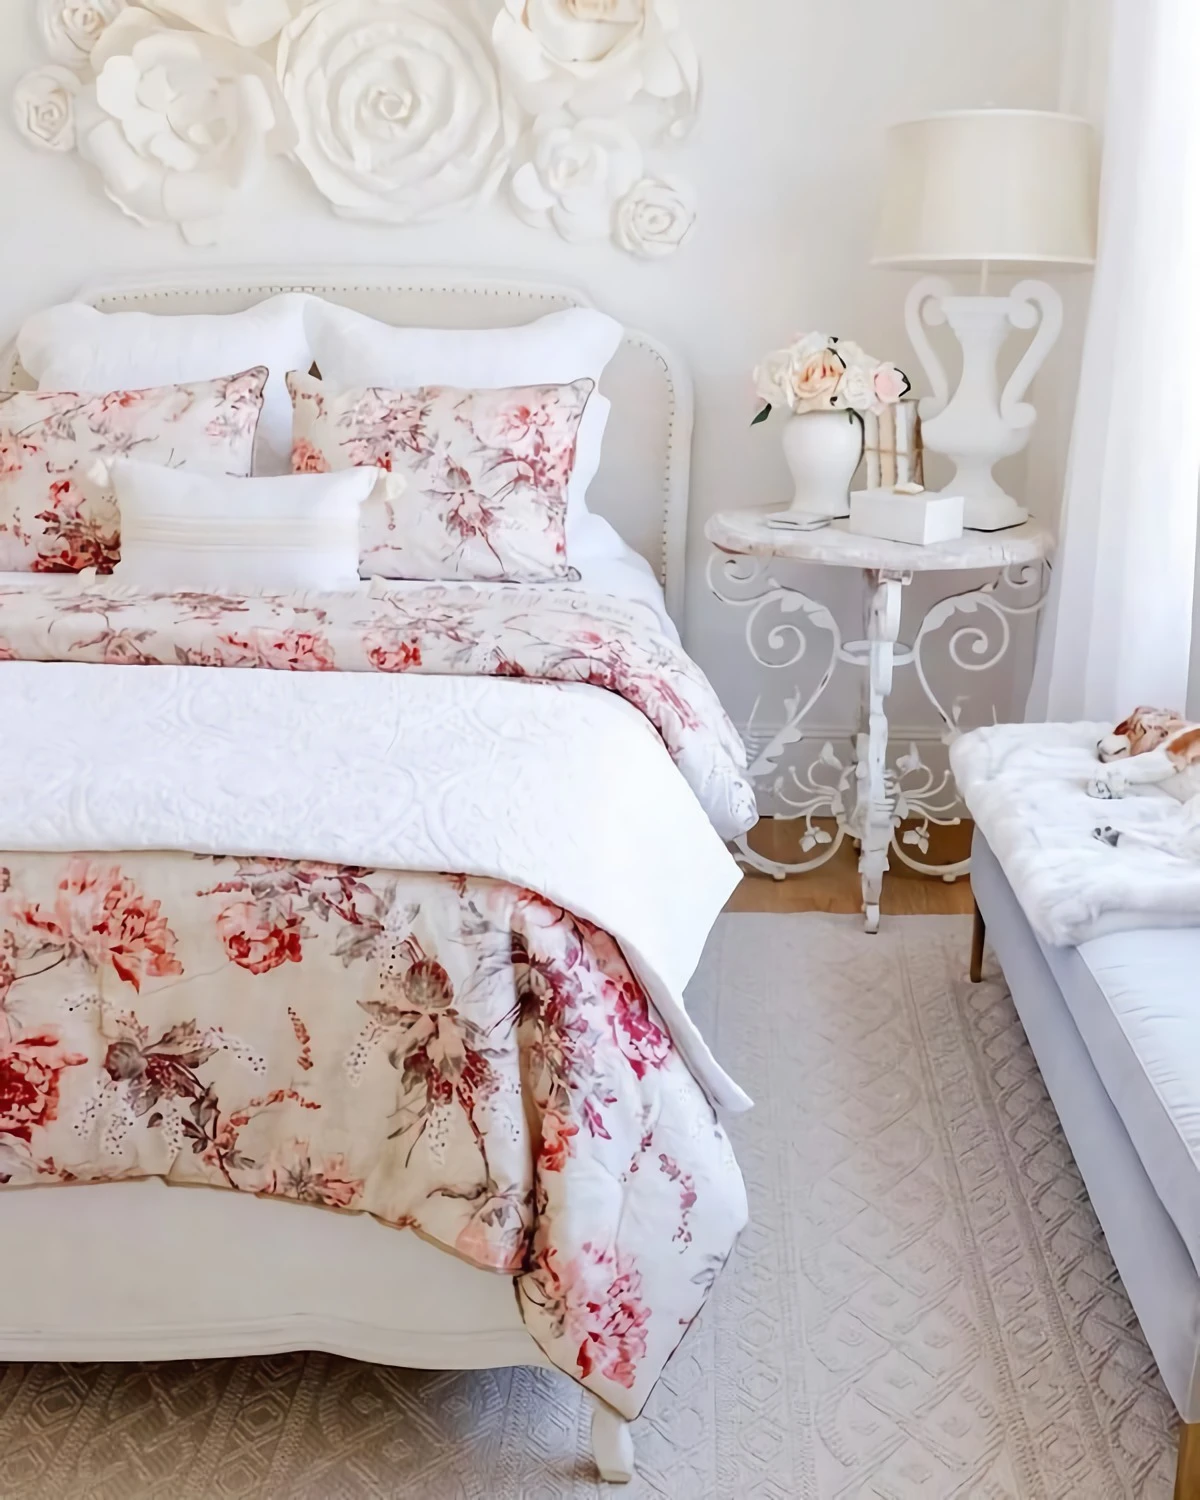 floral bed linens on bed with white heaboard